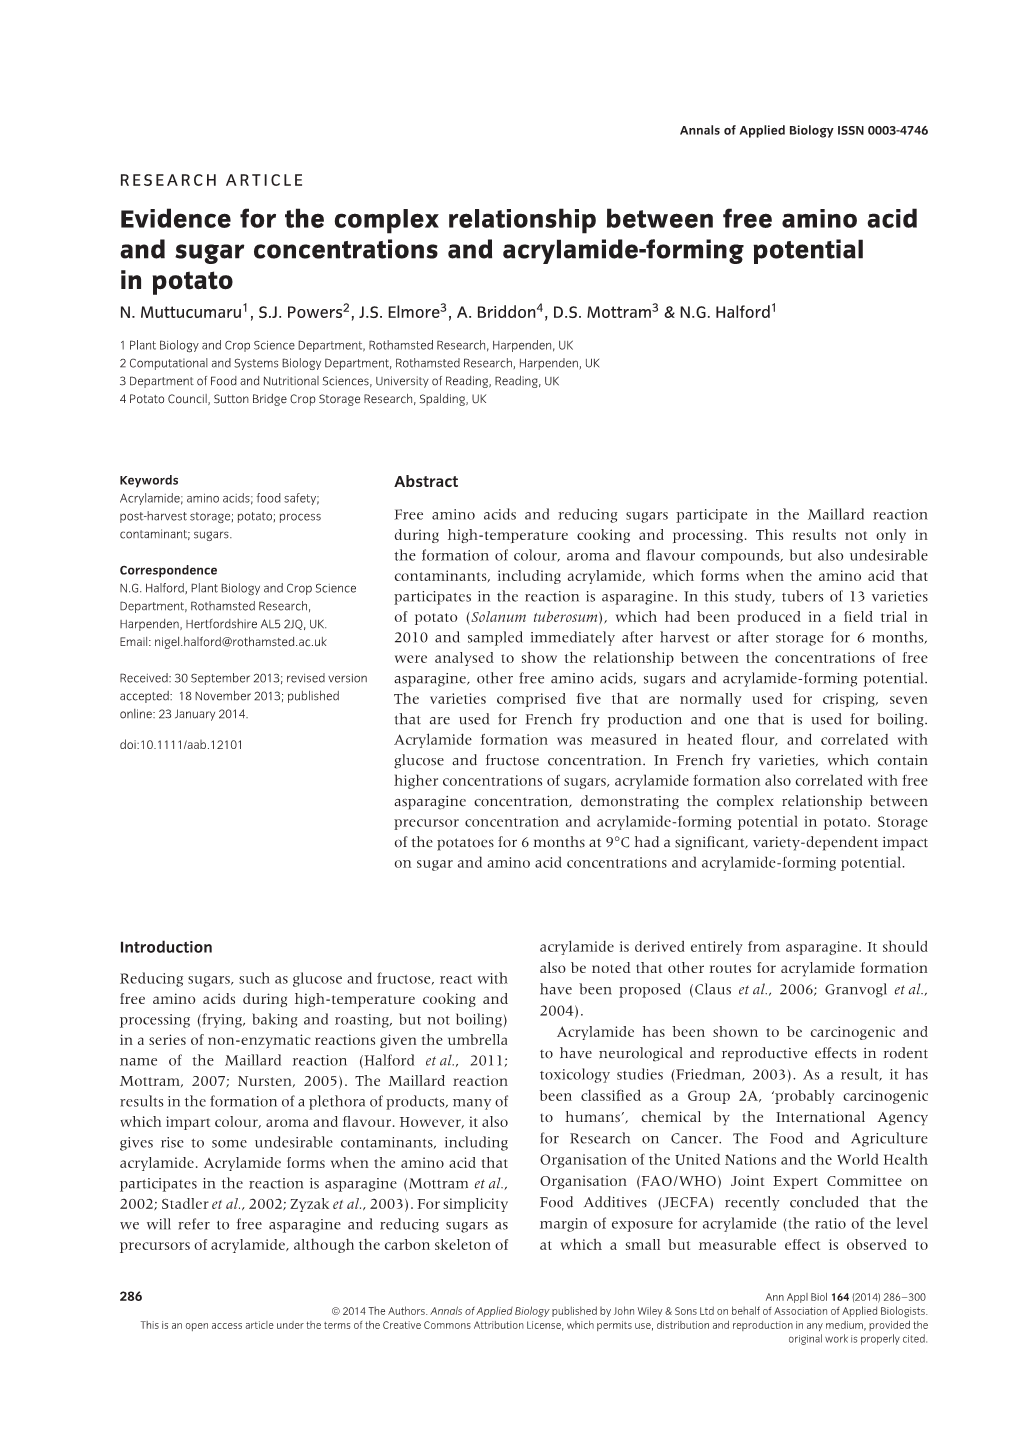 Evidence for the Complex Relationship Between Free Amino Acid and Sugar Concentrations and Acrylamide-Forming Potential in Potato N